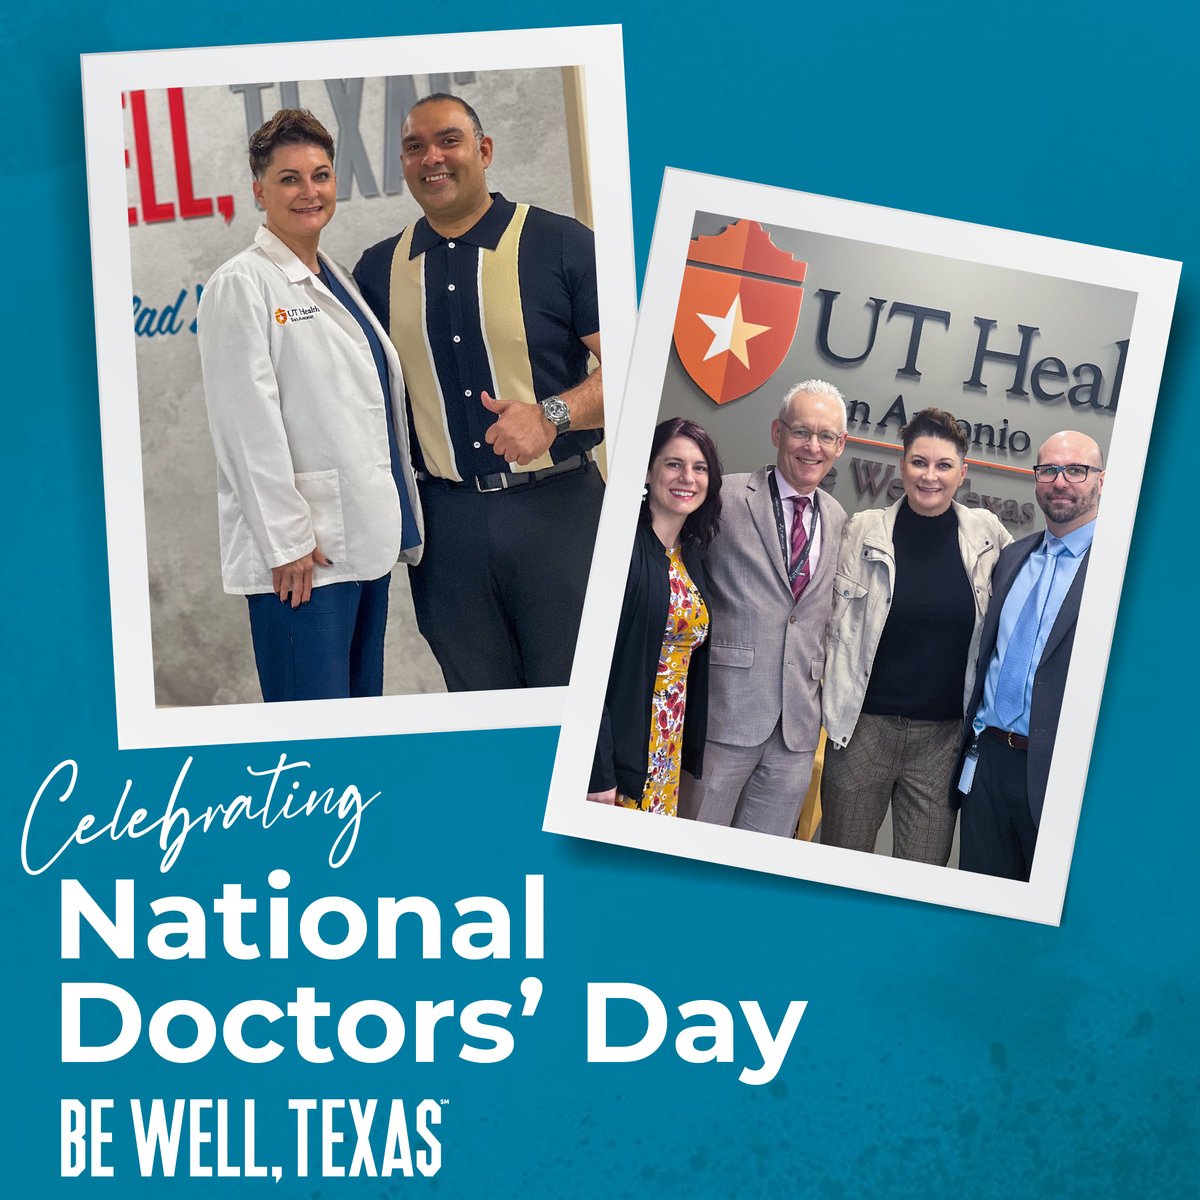 We would like to wish a happy #NationalDoctorsDay to all of our wonderful #BeWellTexas doctors & clinicians: Drs. King, Martin, Broussard, Dyer, Datt, & Bone! Shout out to our #telehealth team: Drs. Lin, Dalby, and Cousins! We appreciate all that you do for our patients! 🩺💙